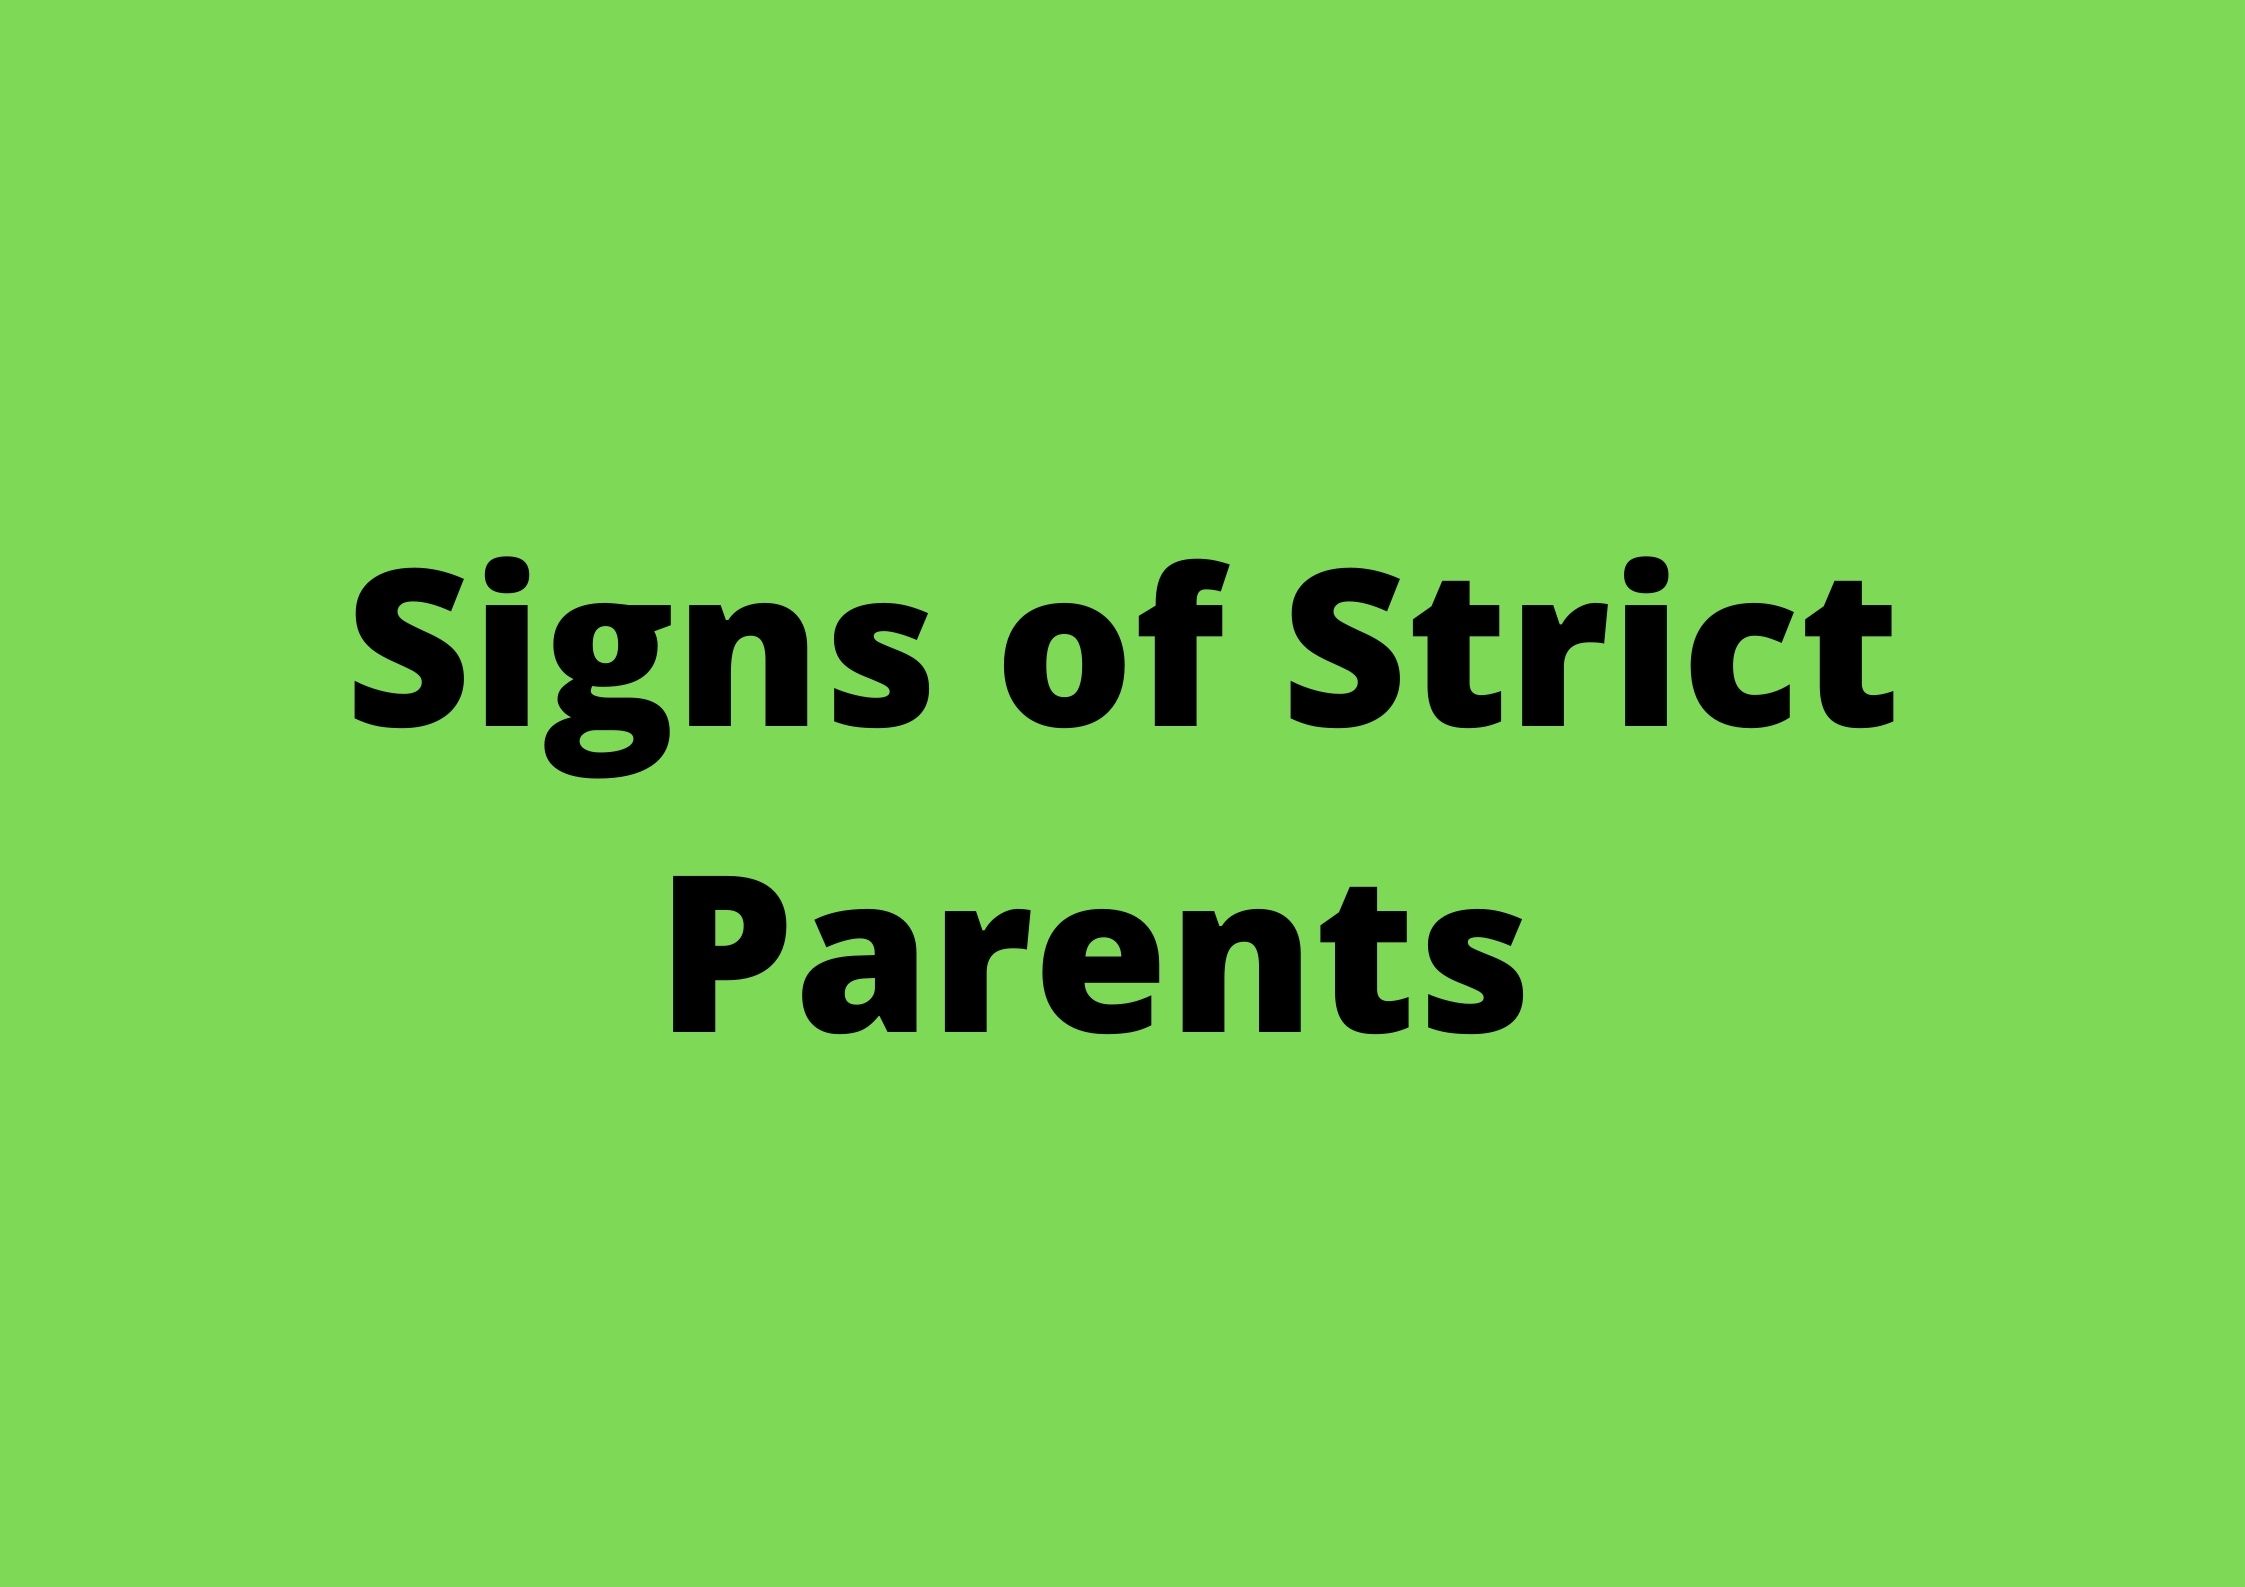 Signs of strict parents (what to exactly to look for)